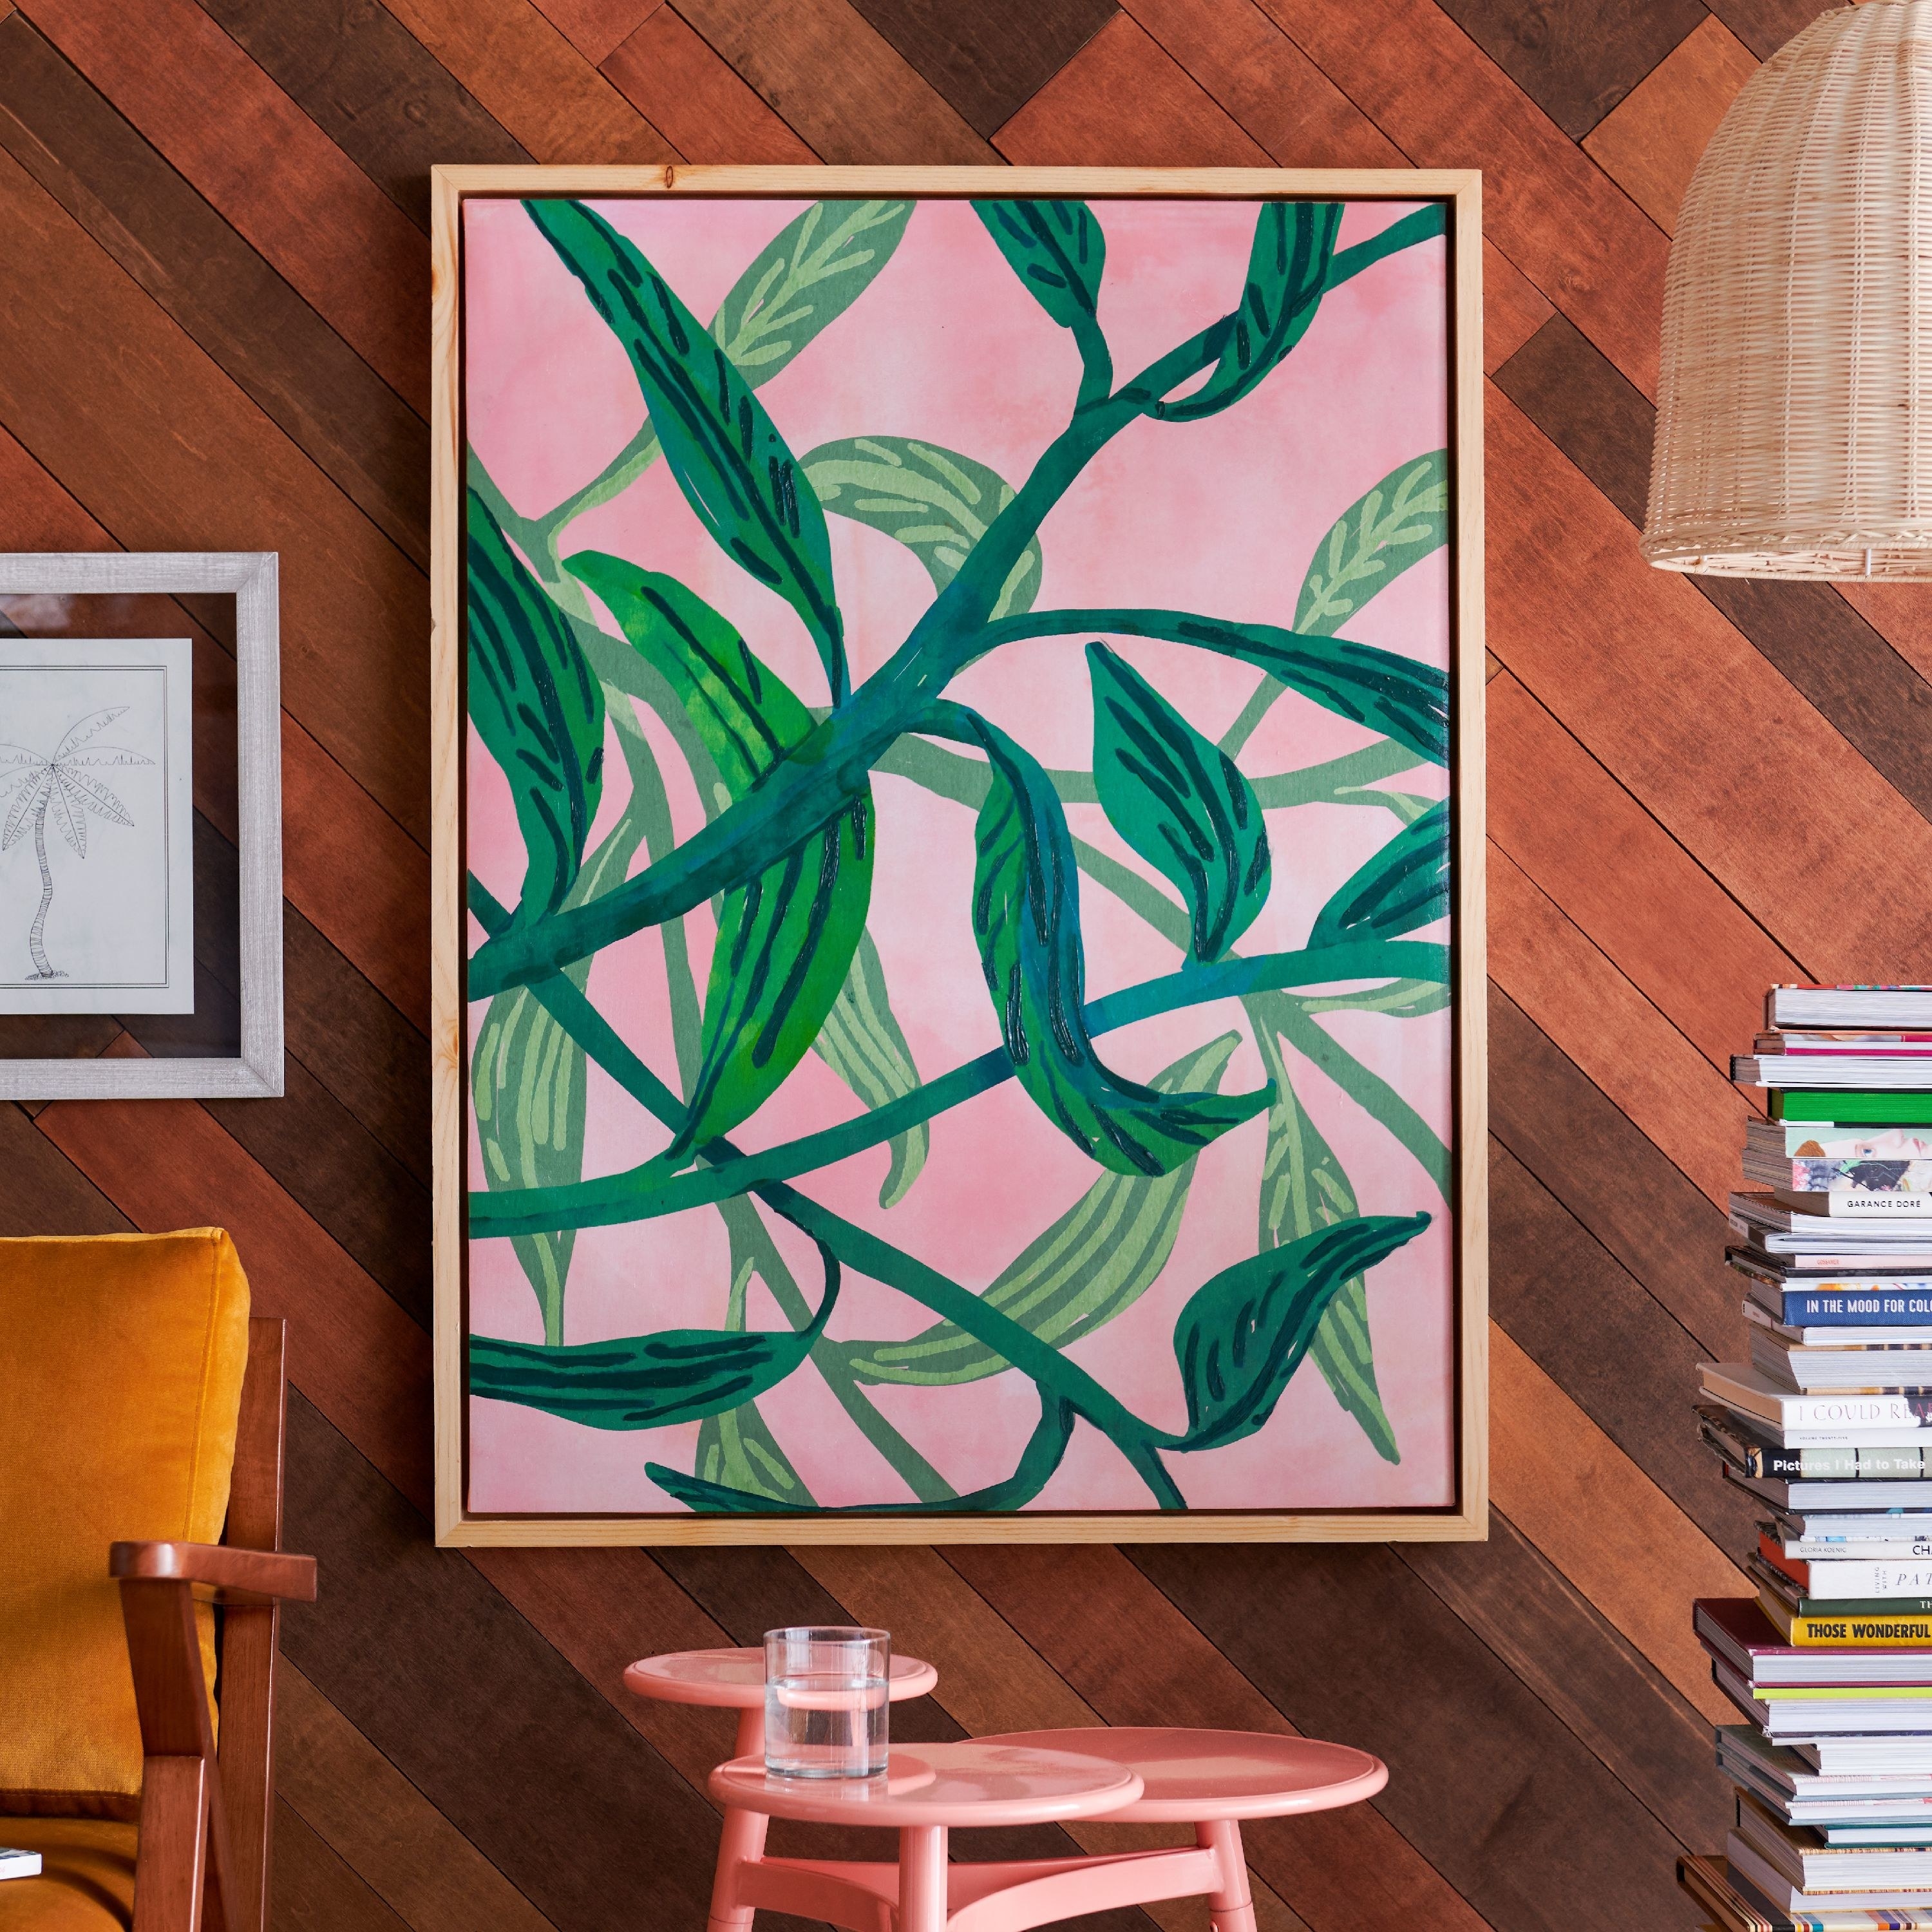 The wall art, which has a pink background and a green drawing of plant vines